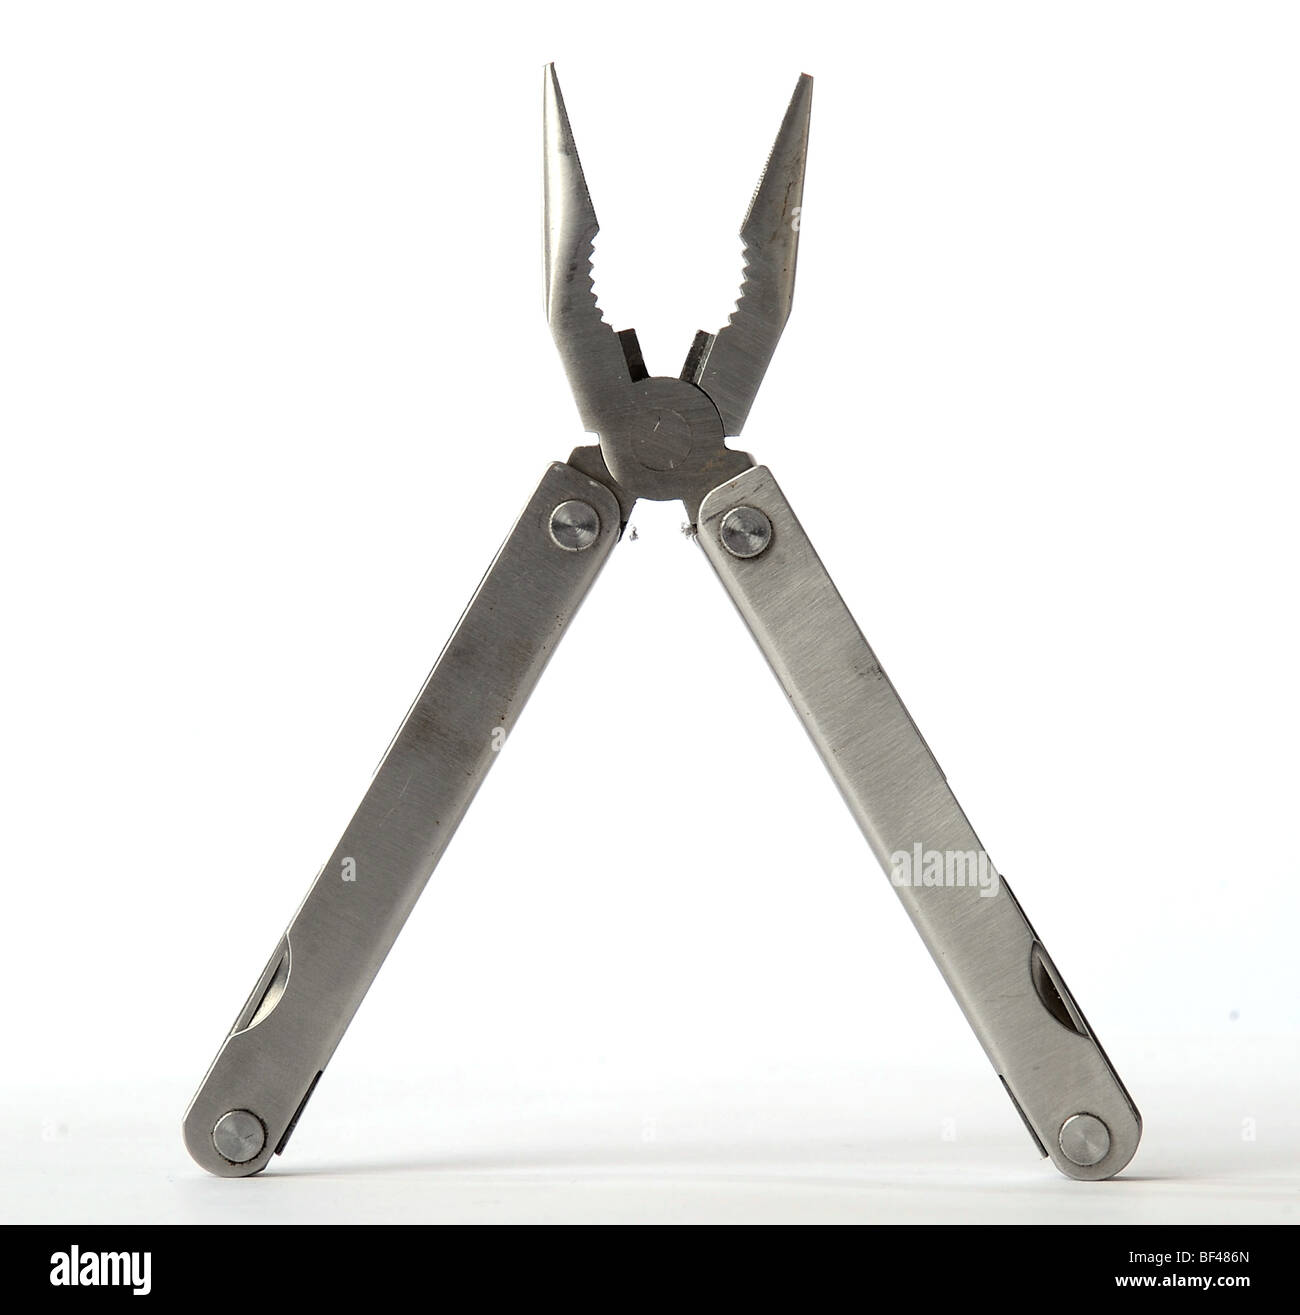 Rolson leatherman style copy retractable toolkit including knives pliers and screwdriver Stock Photo